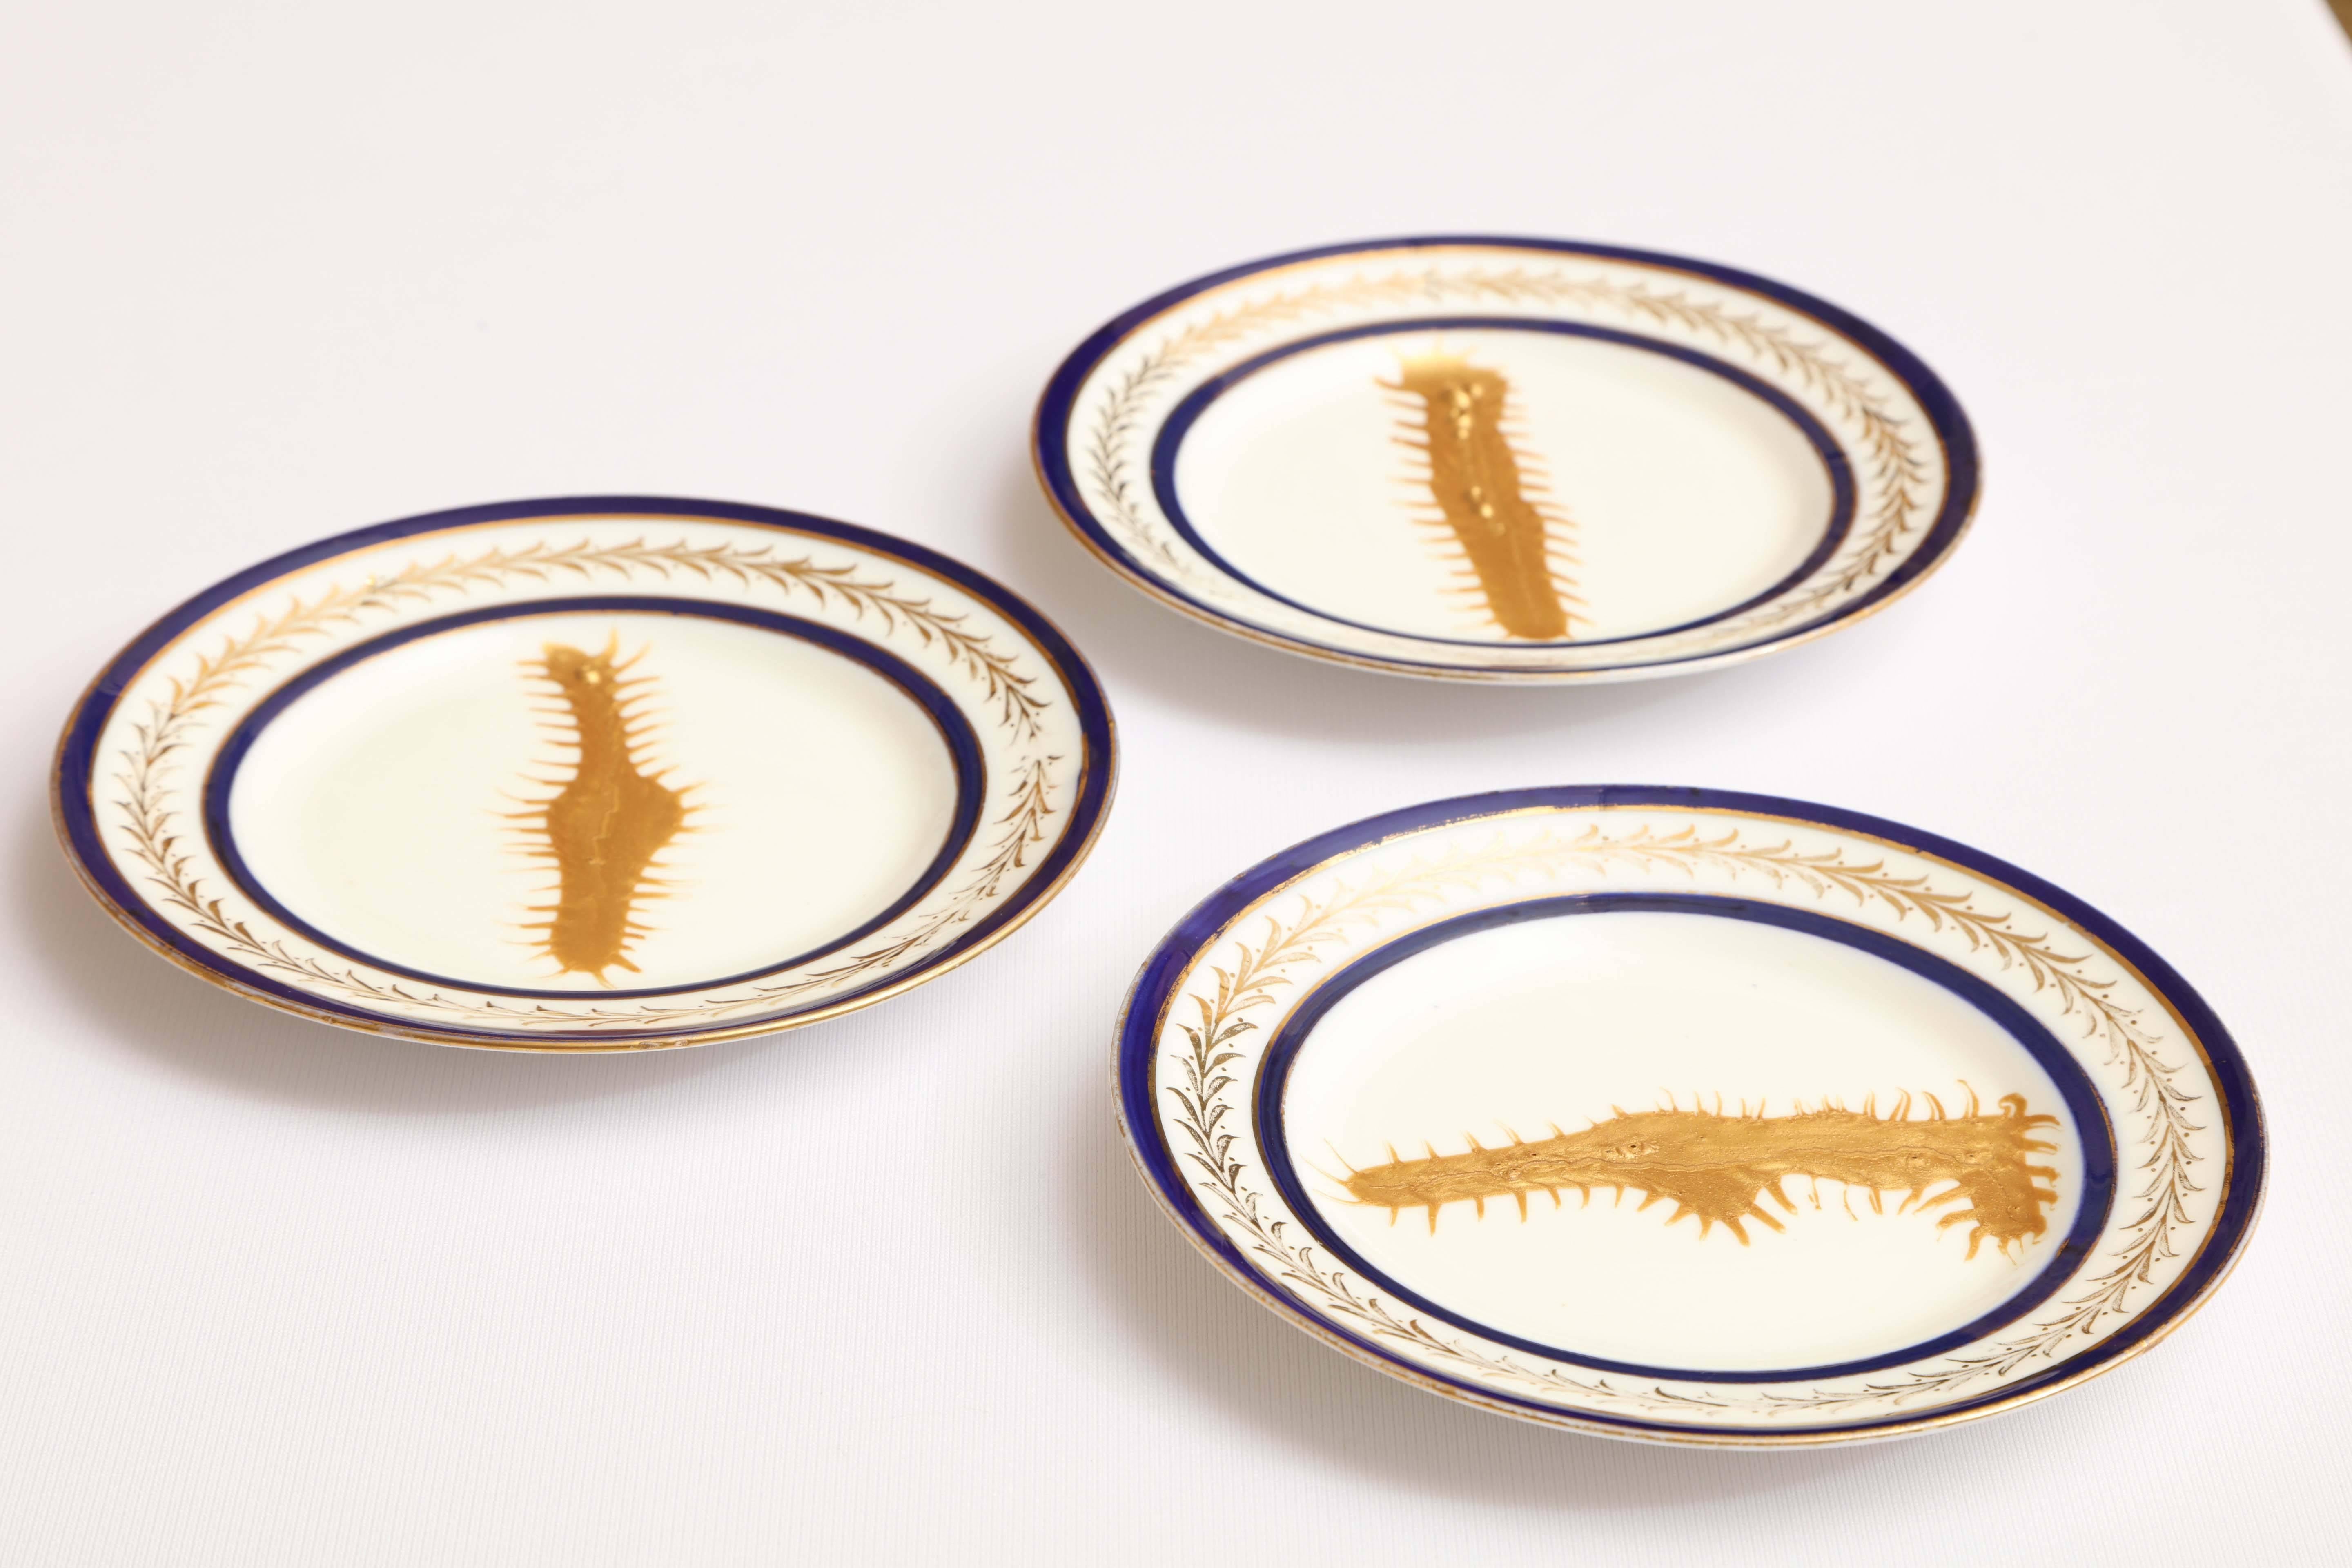 Set of three blue and gold ocean plate collection #1 #2 and #4.
Hand-painted on repurposed English porcelain and baked individually.
This set of three plates are also part of a large collection on ocean plates.
Peter Valcarcel is a celebrated